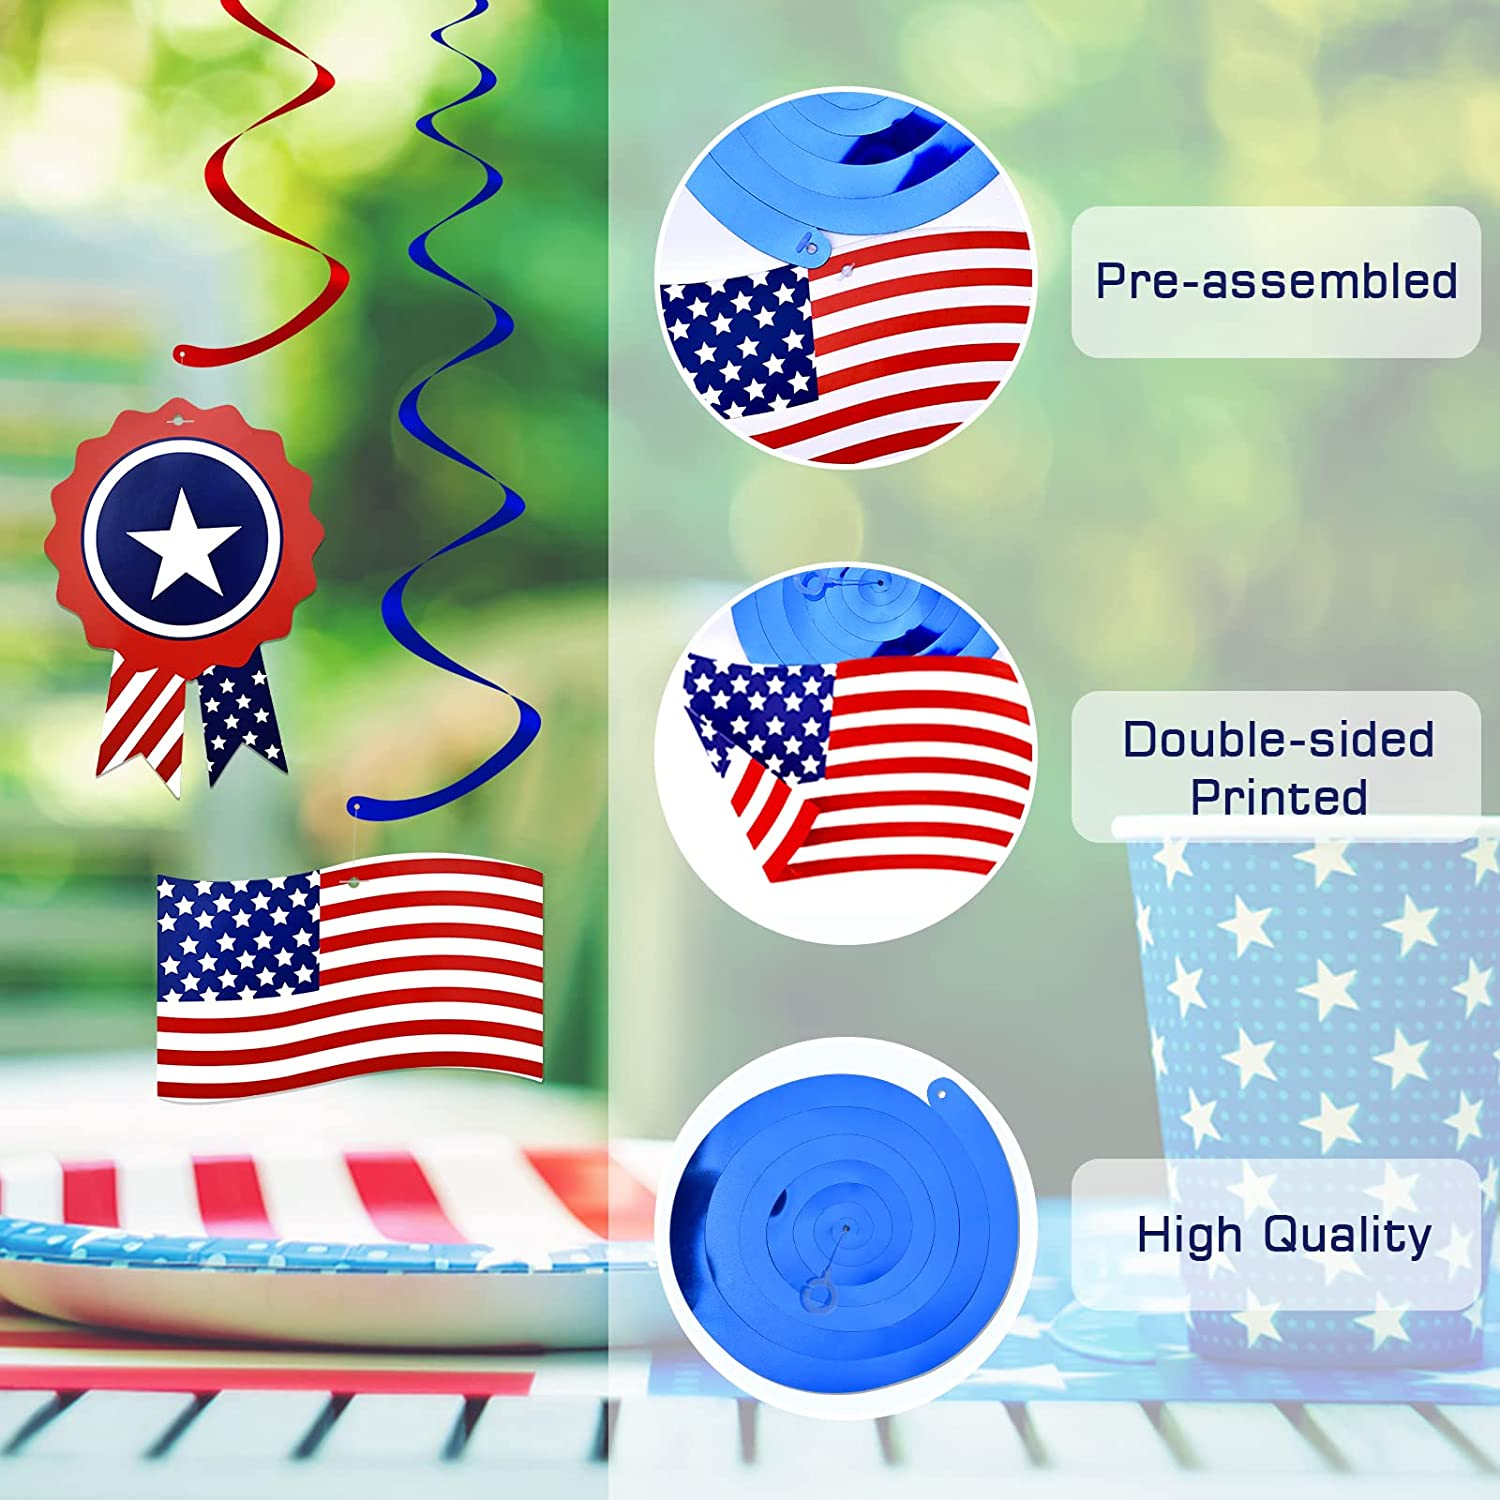 4Th of July Decorations Decor Hanging Swirls American Flag Pennant Patriotic Banner Independence Day Memorial Day Decortions Theme Party Red White Blue Decor Supplies